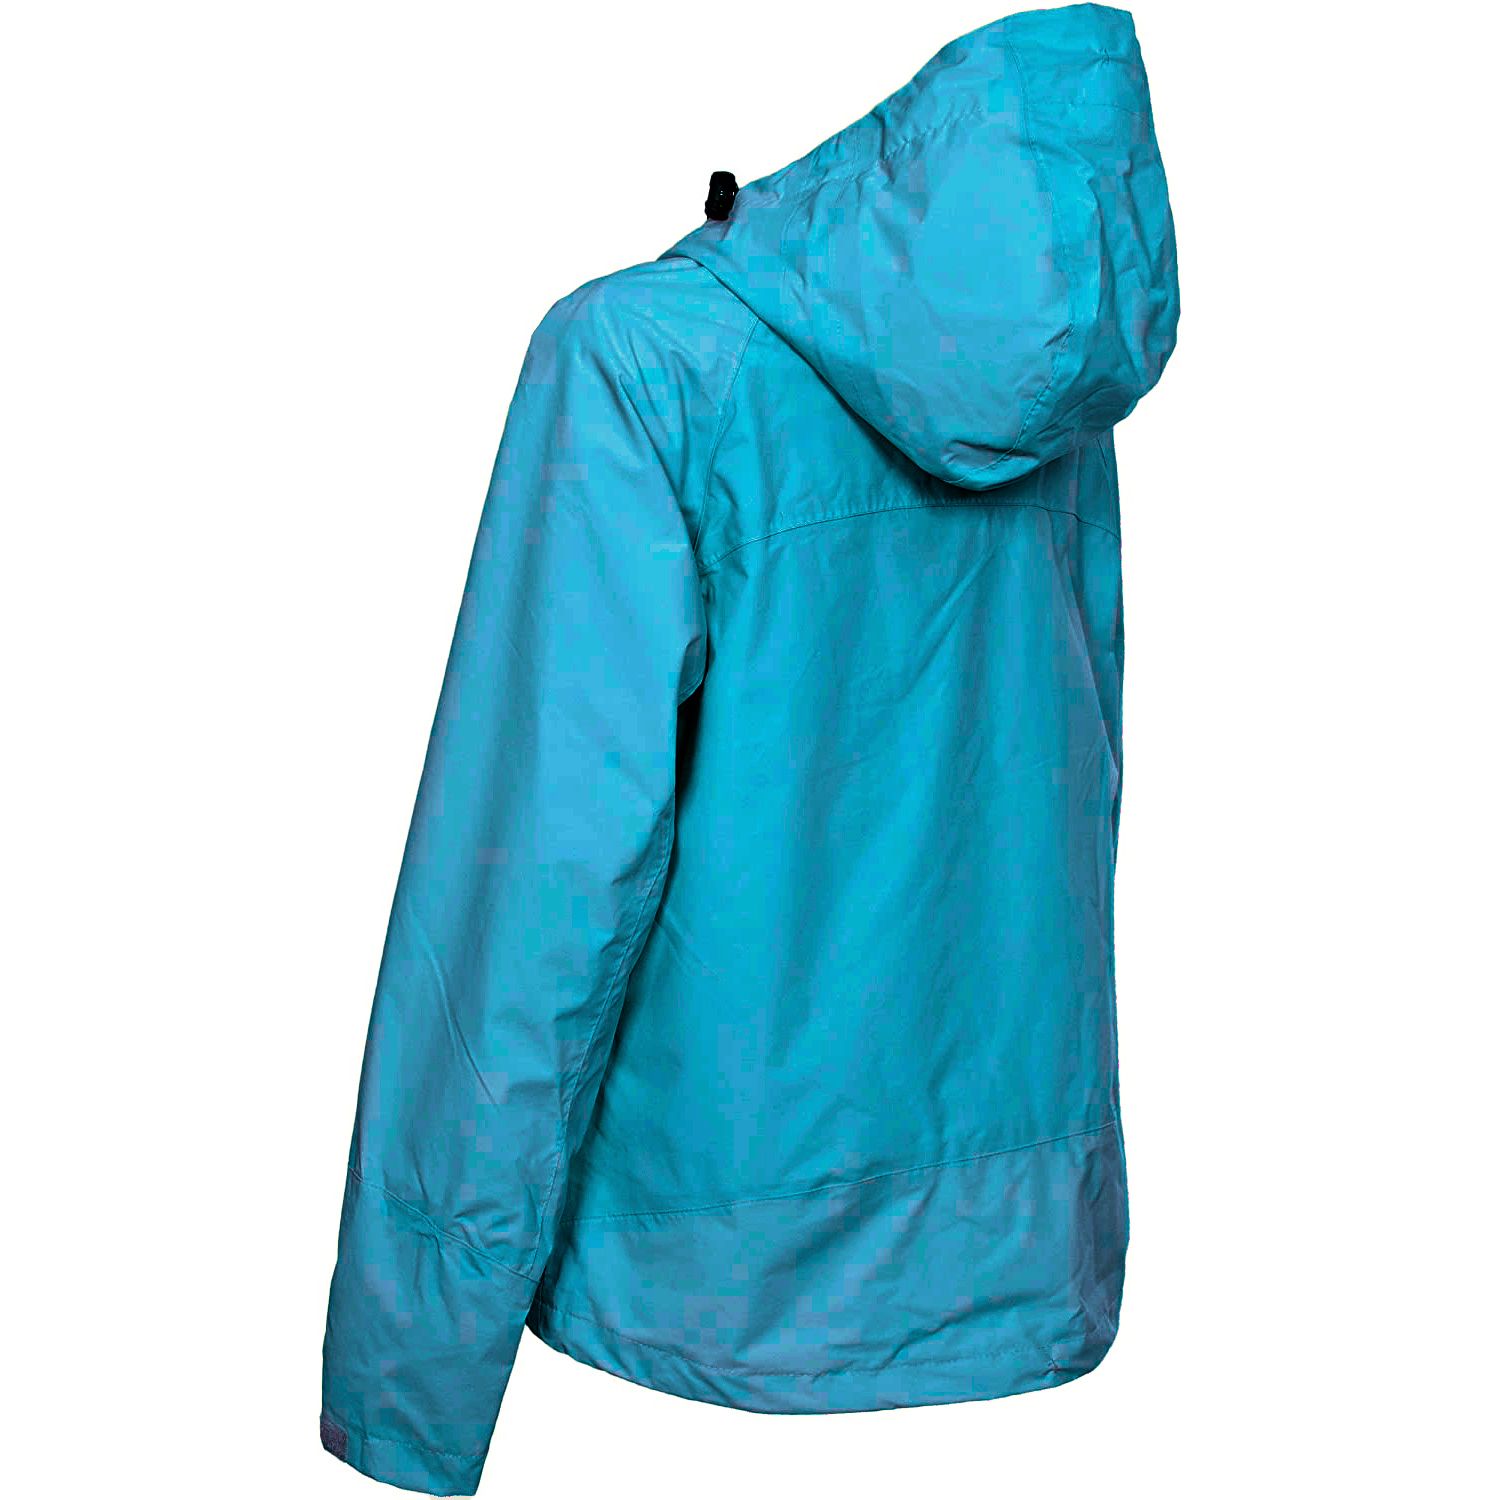 Shell waterproof jacket with mesh lining. Waterproof 5000mm. Breathable 5000mvp. Adjustable grown-on hood. 2 Pockets and inner pocket. Full zip build. Taped seams. Shell: 100% polyamide with PU coating. Mesh: 100% polyester. Lining: 100% polyester.